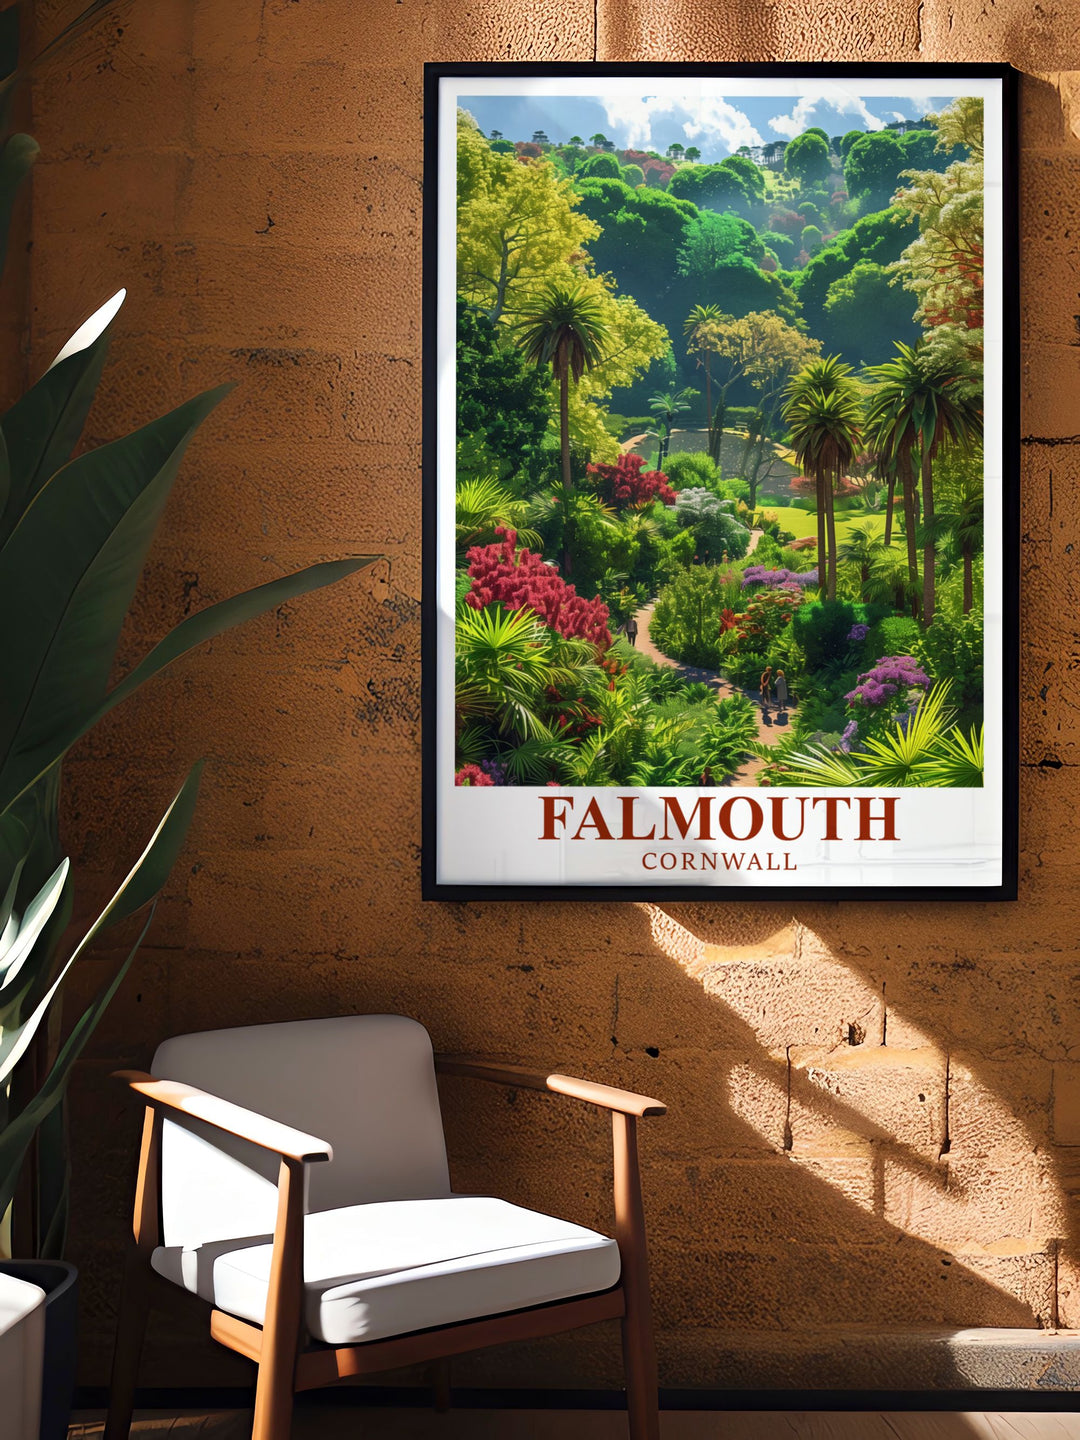 Trebah Garden wall art featuring the stunning garden in Falmouth, Cornwall. This travel poster is perfect for decorating your home with a touch of Cornwalls natural splendor and serene scenery.